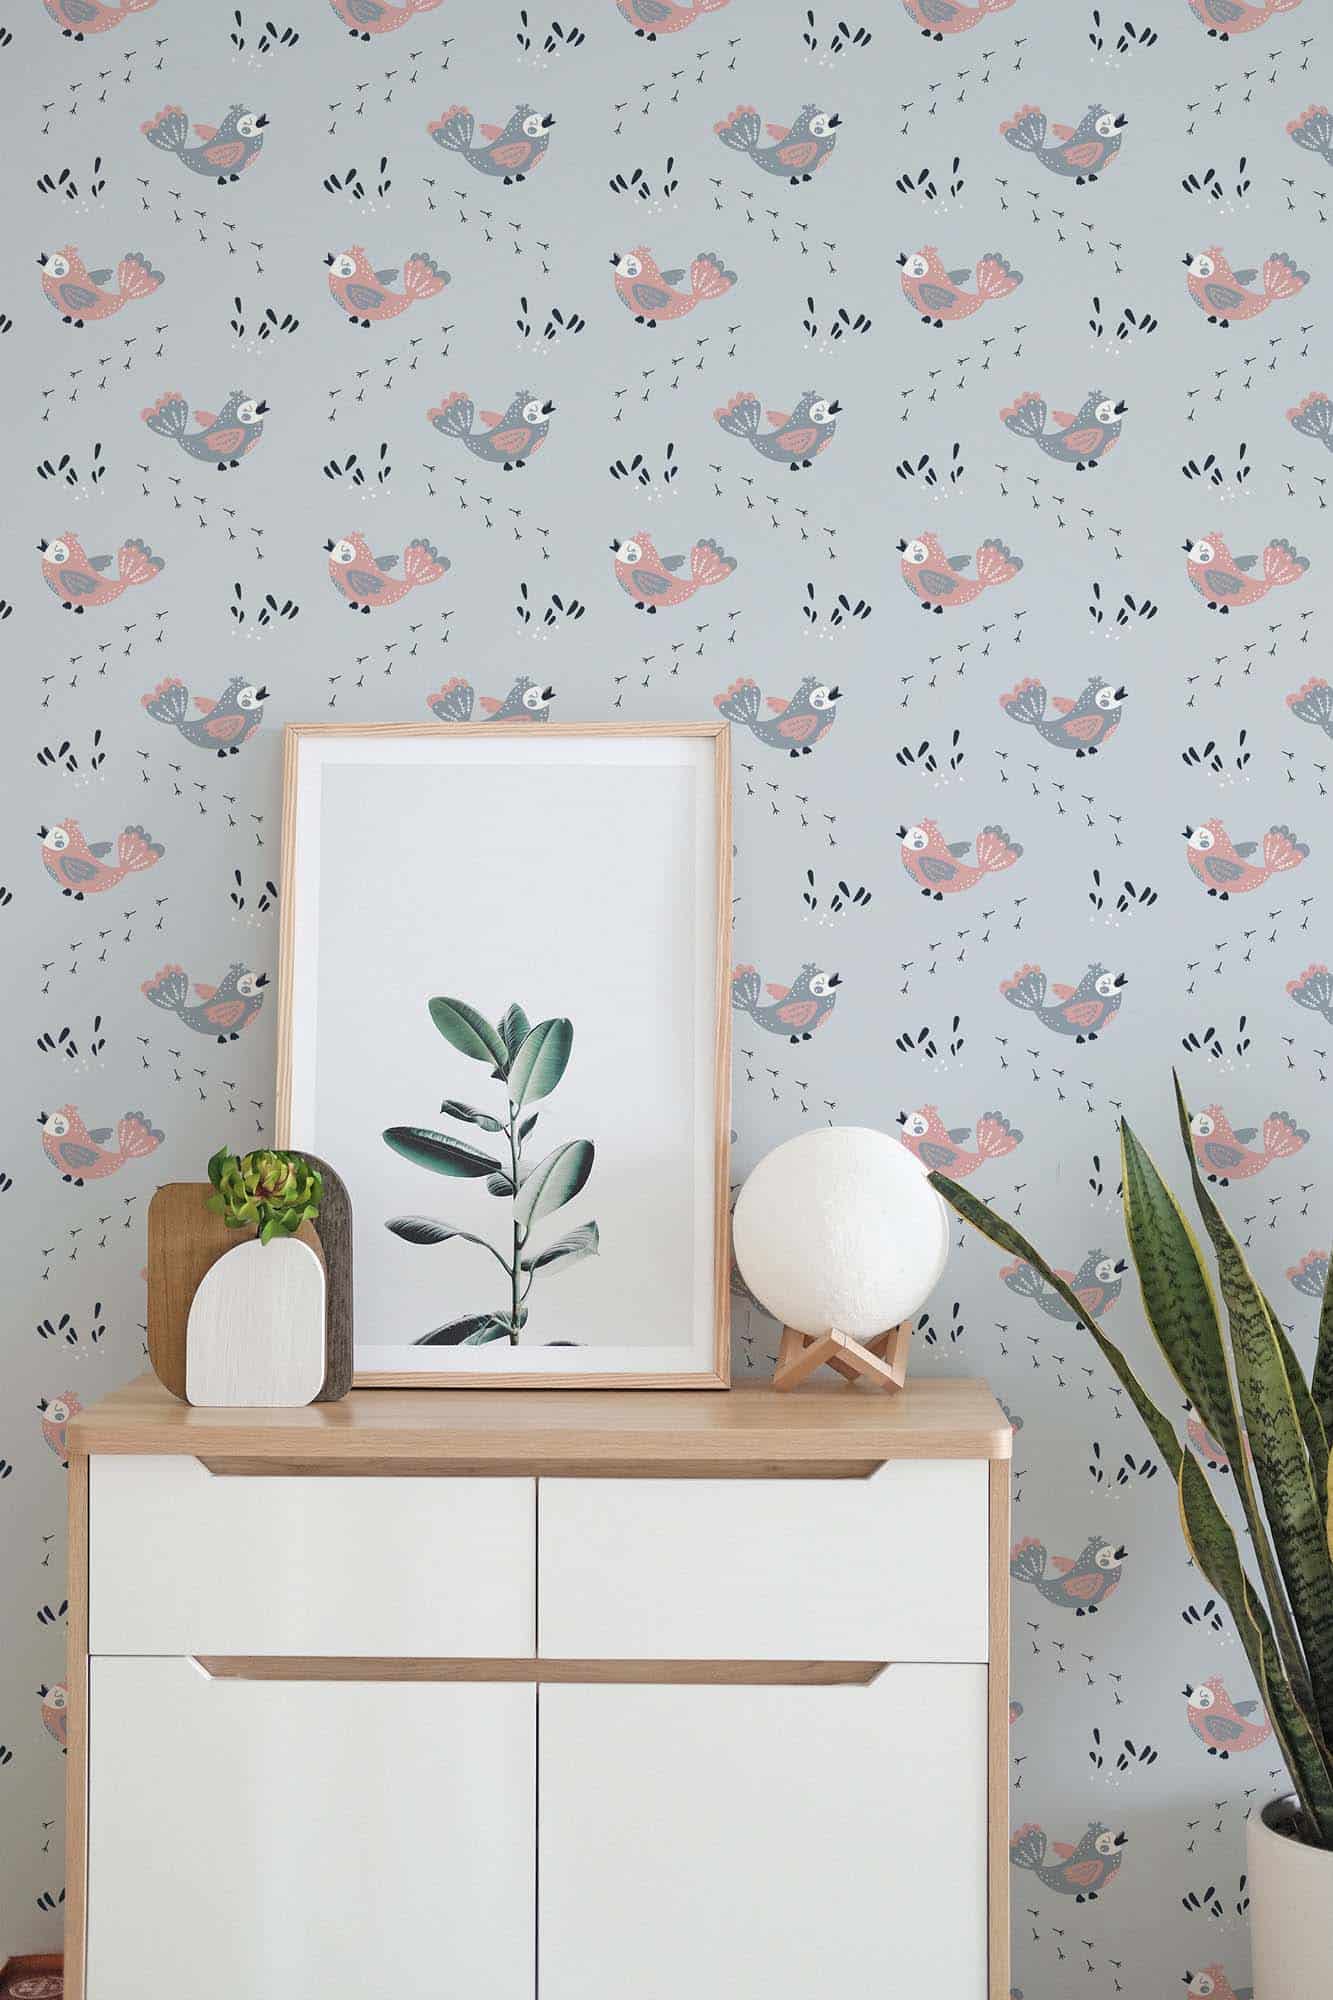 Bird nursery wallpaper - Peel and Stick or Non-Pasted